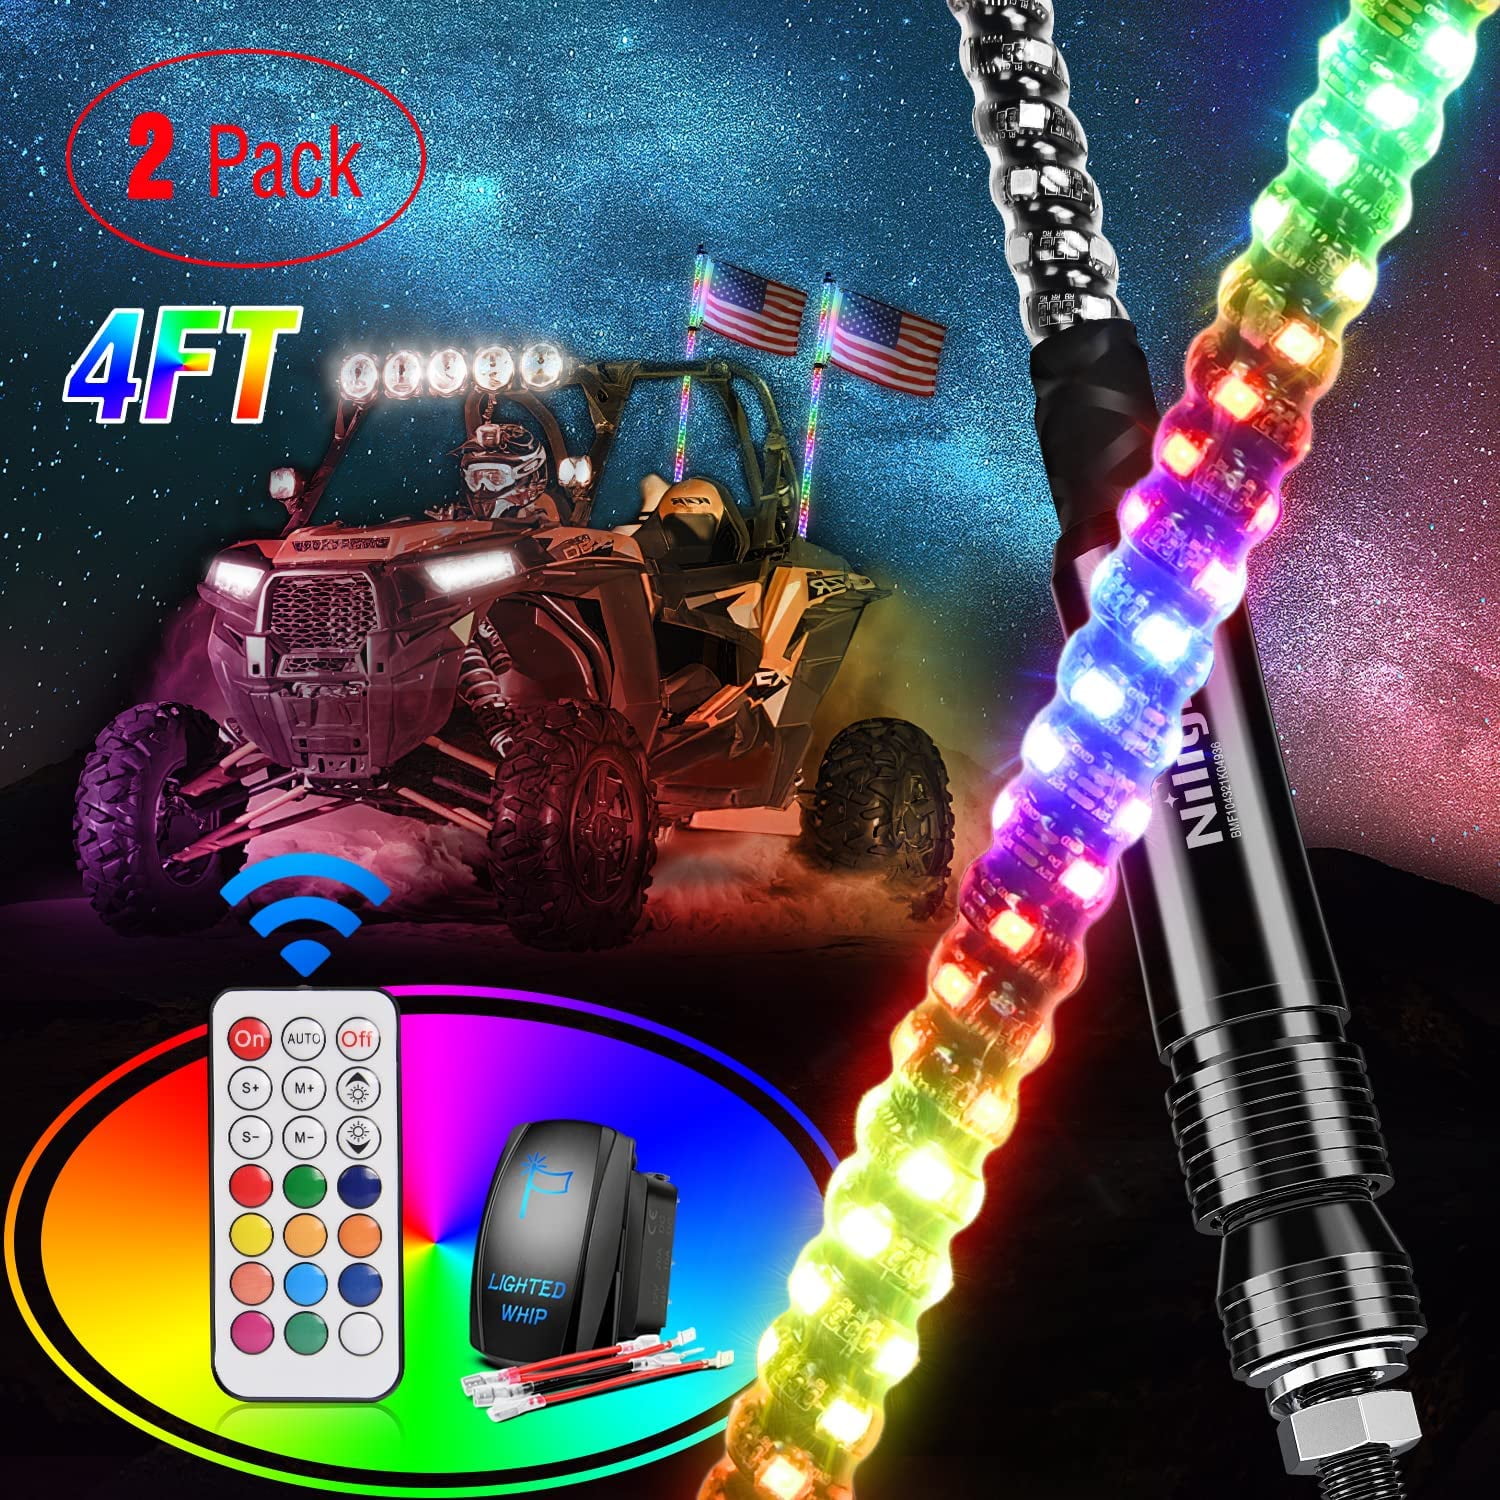 fiacarlighting Pair 4FT Remote Control Chasing Twisted Sandtoys LED Whips Lights